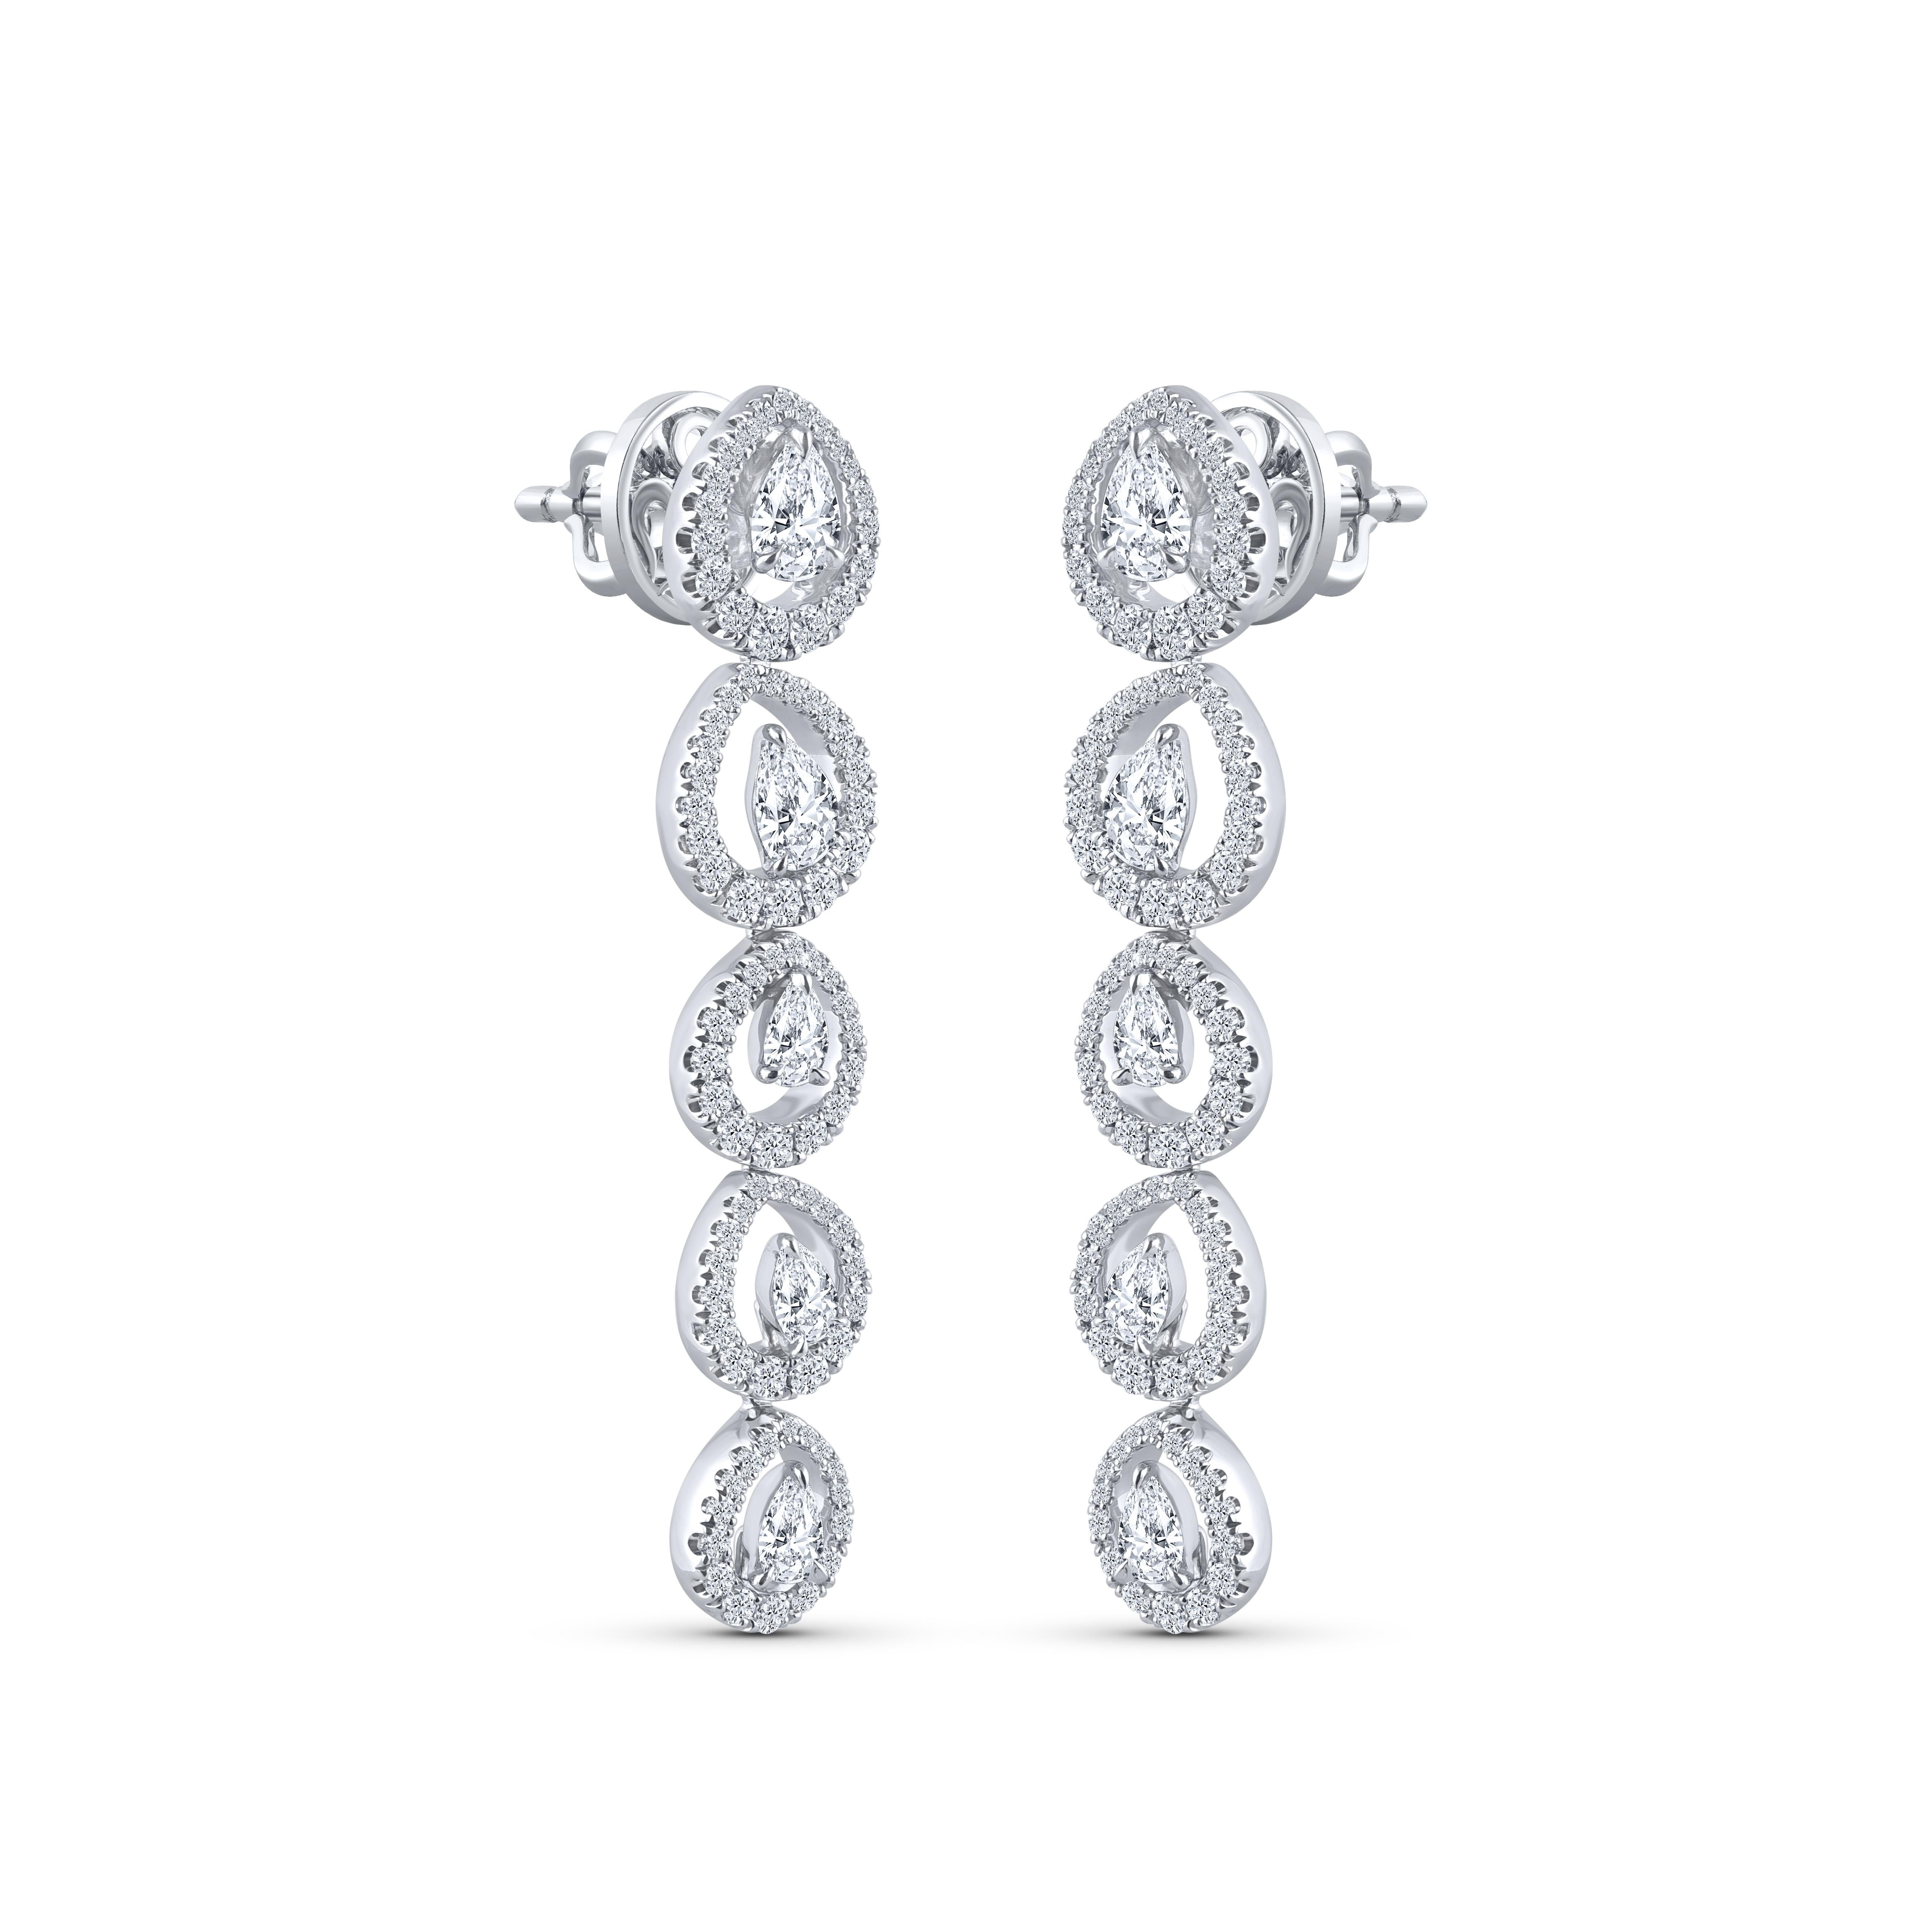 These contemporary dangling earrings are studded with a total of 182 diamonds – 172 brilliant cut and 10 pear diamonds. These diamonds are graded as D-F color and IF-VS clarity. 

These earrings are a part of our Raindrop Collection – which